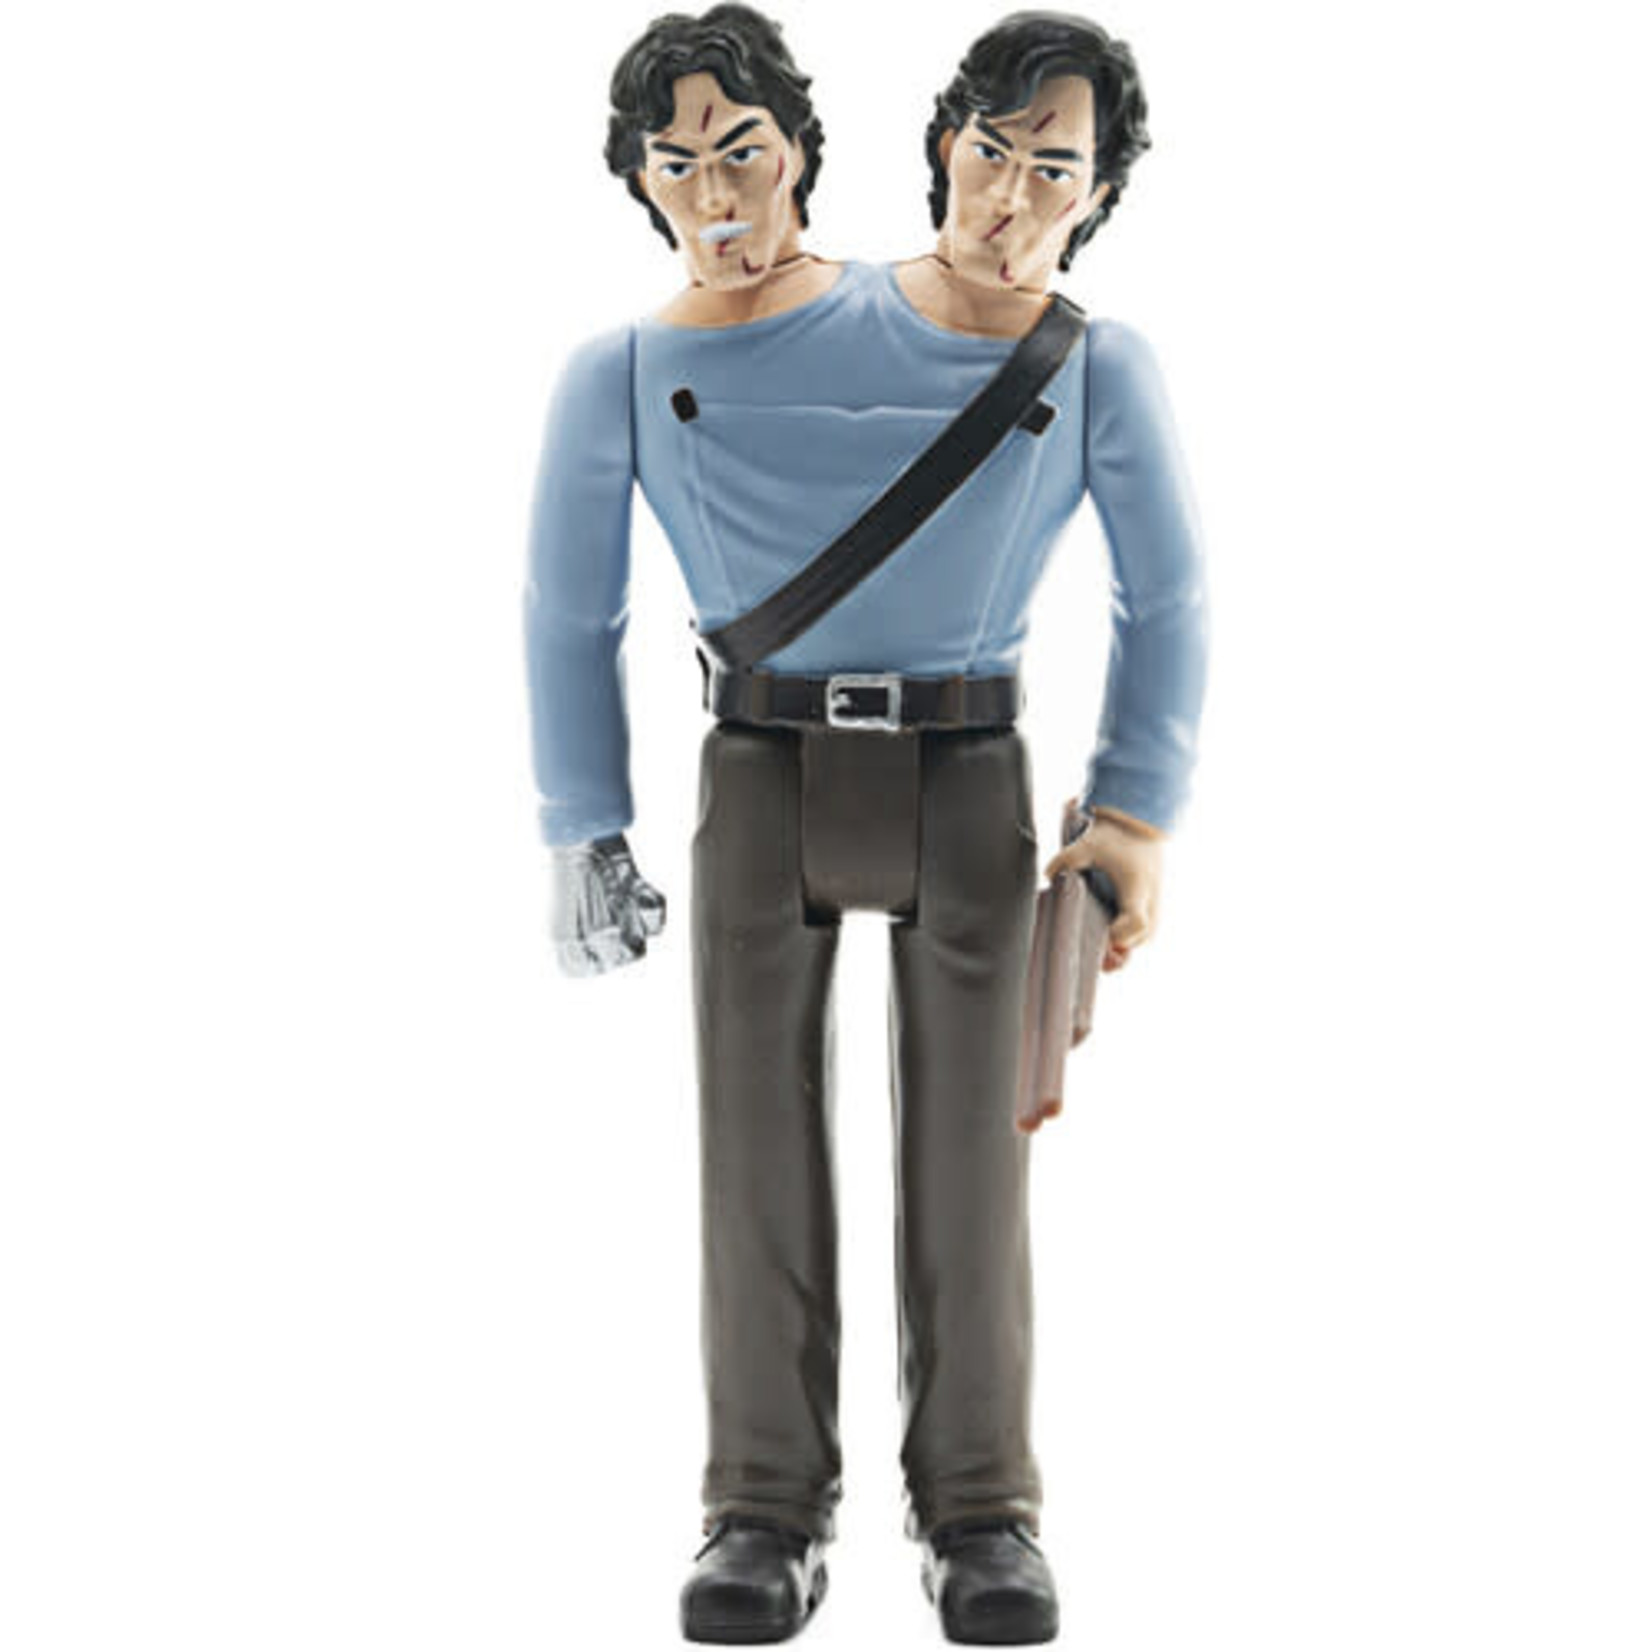 Super7 Army of Darkness - Two-Headed Ash (ReAction Figure)